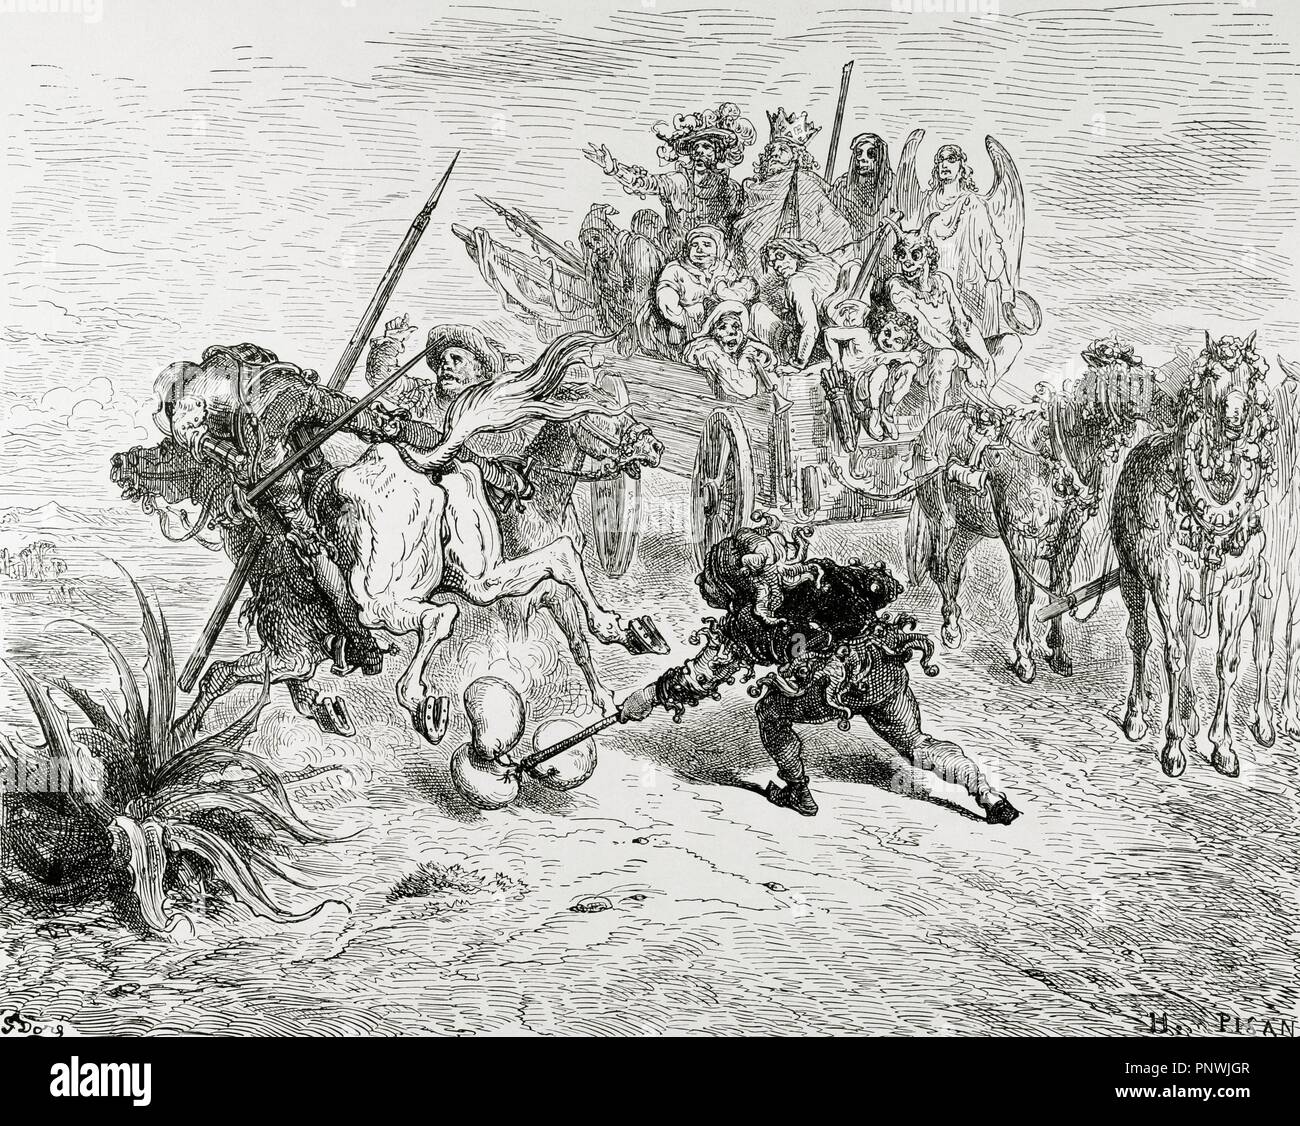 Don Quixote by Miguel de Cervantes. Don Quixote meets a traveling theater group. Engraving by Gustave Dore (II, 11). 19th century. Stock Photo